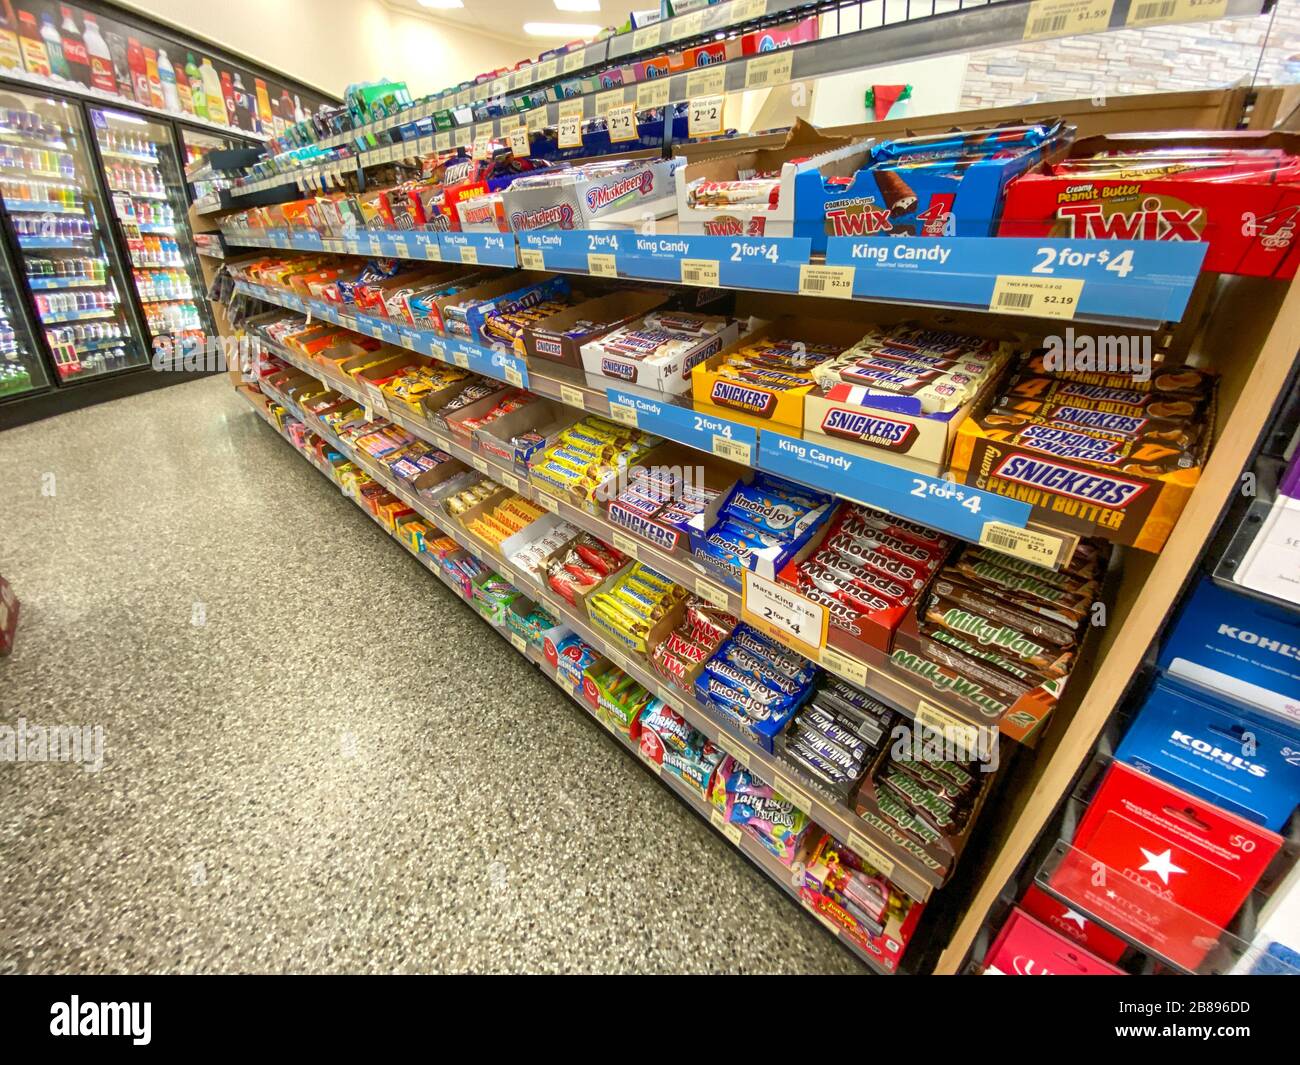 Orlando,FL/USA-12/27/19: The candy and beverage displays at a Wawa gas station, fast food restaurant, and convenience store. Stock Photo